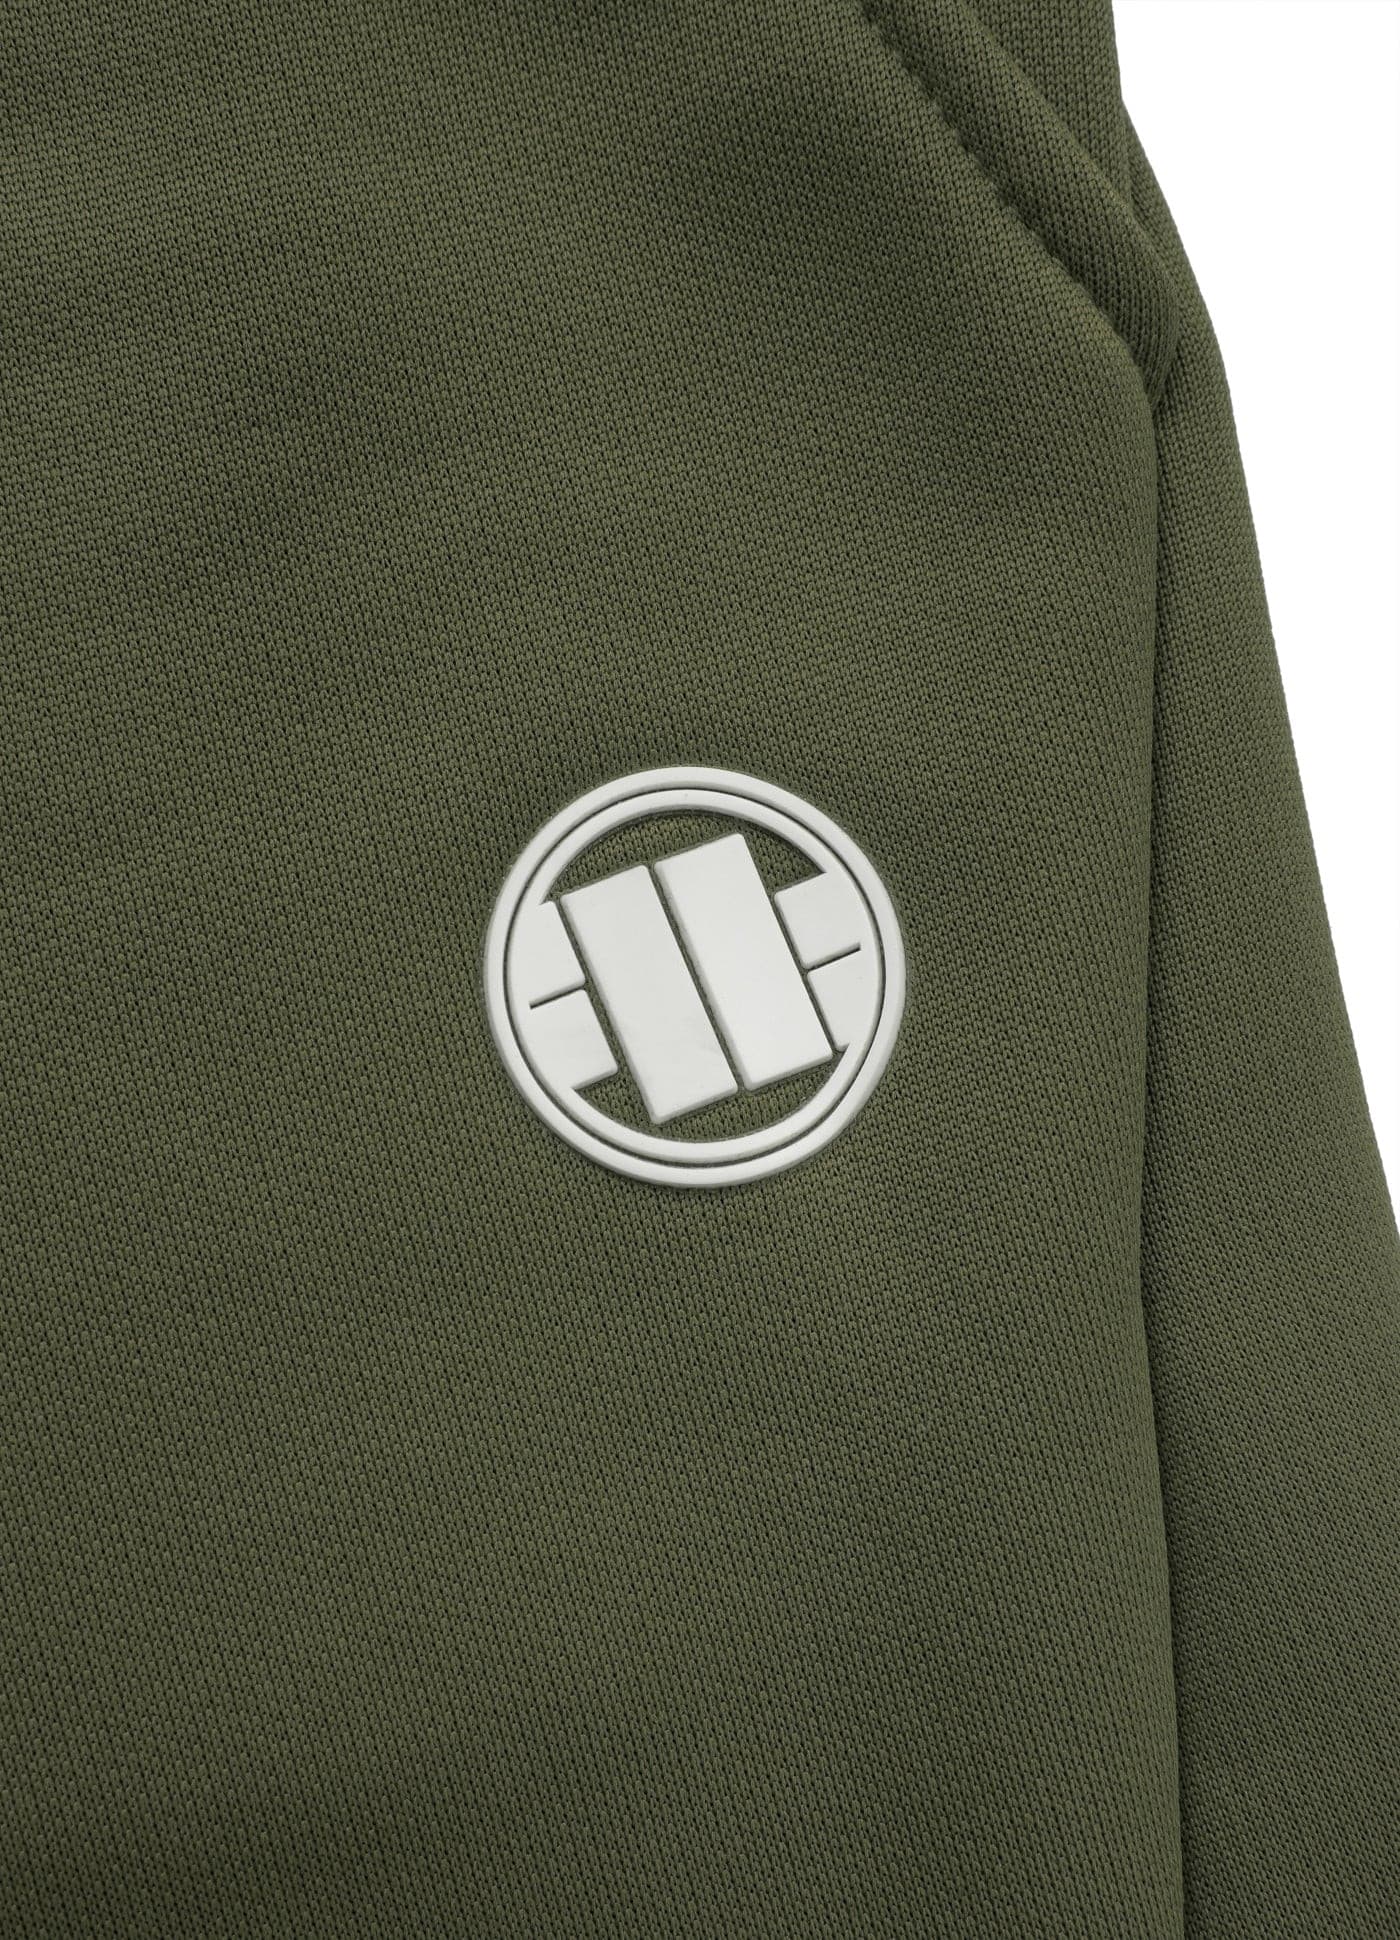 Buy OLD SCHOOL SMALL LOGO Olive Track Pants